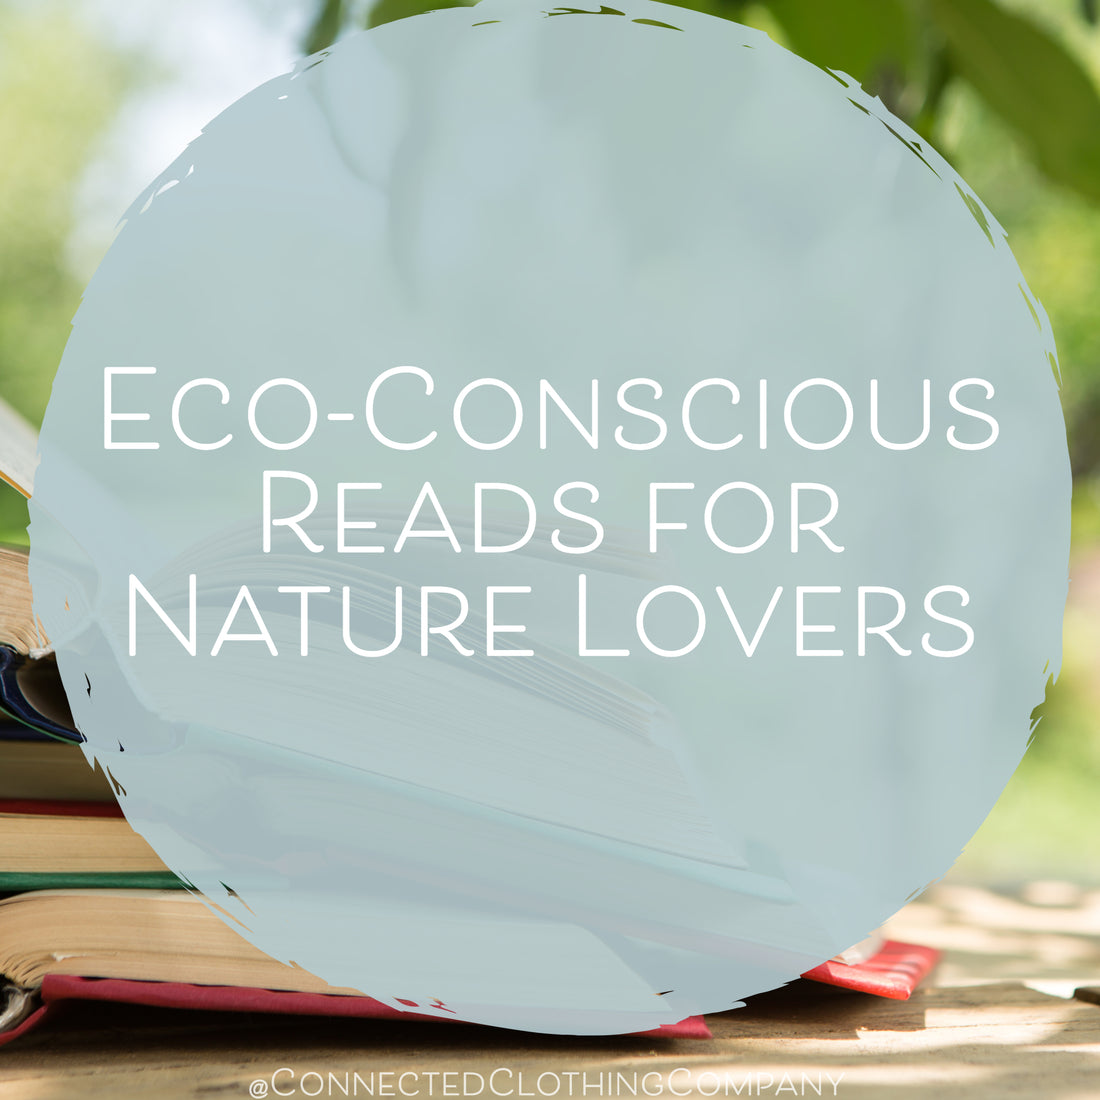 From Forests to Oceans: Eco-Conscious Reads for Nature Lovers